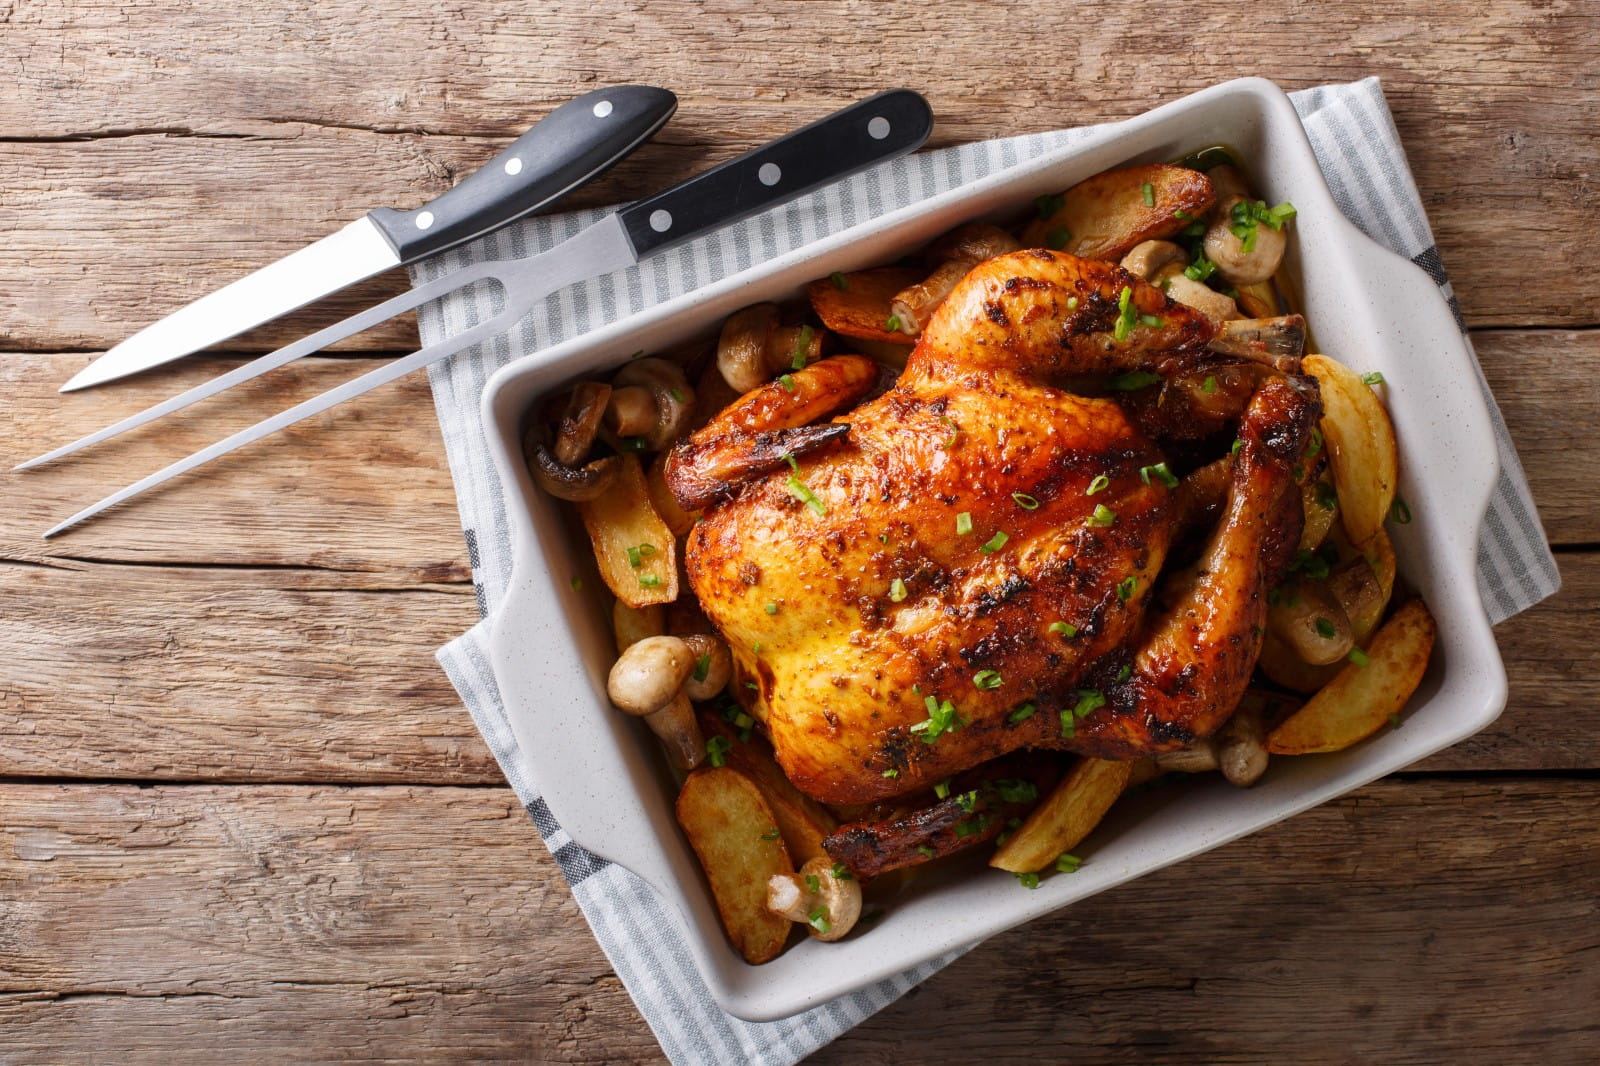 8 great wine (and other) matches for roast chicken